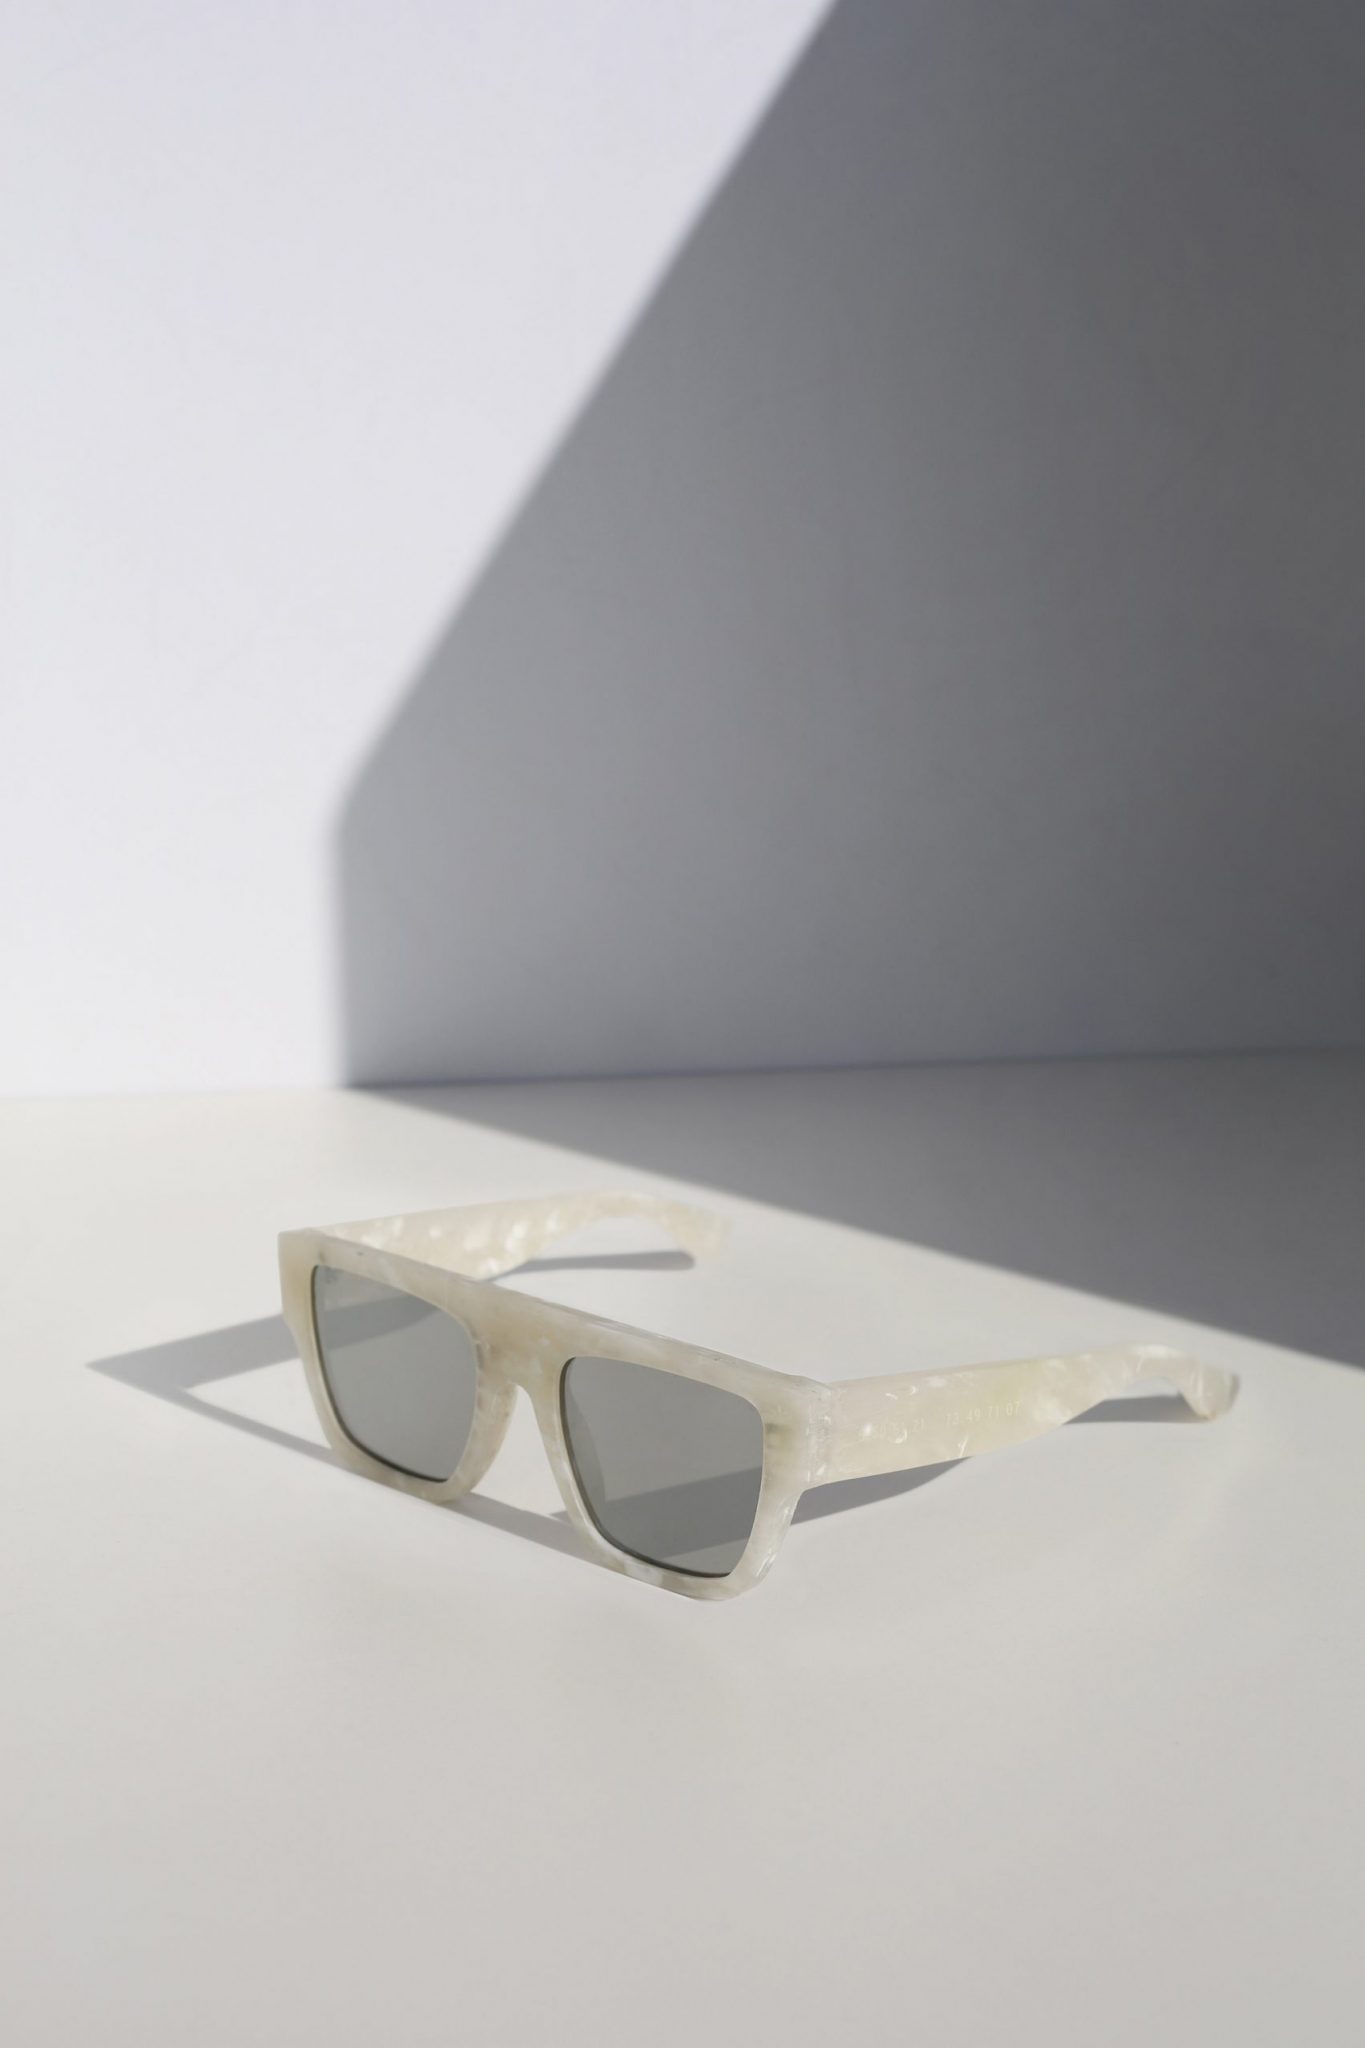 Parley for the Oceans Transforms Plastic Waste from the Ocean Into Fashionable Fundraising Sunglasses